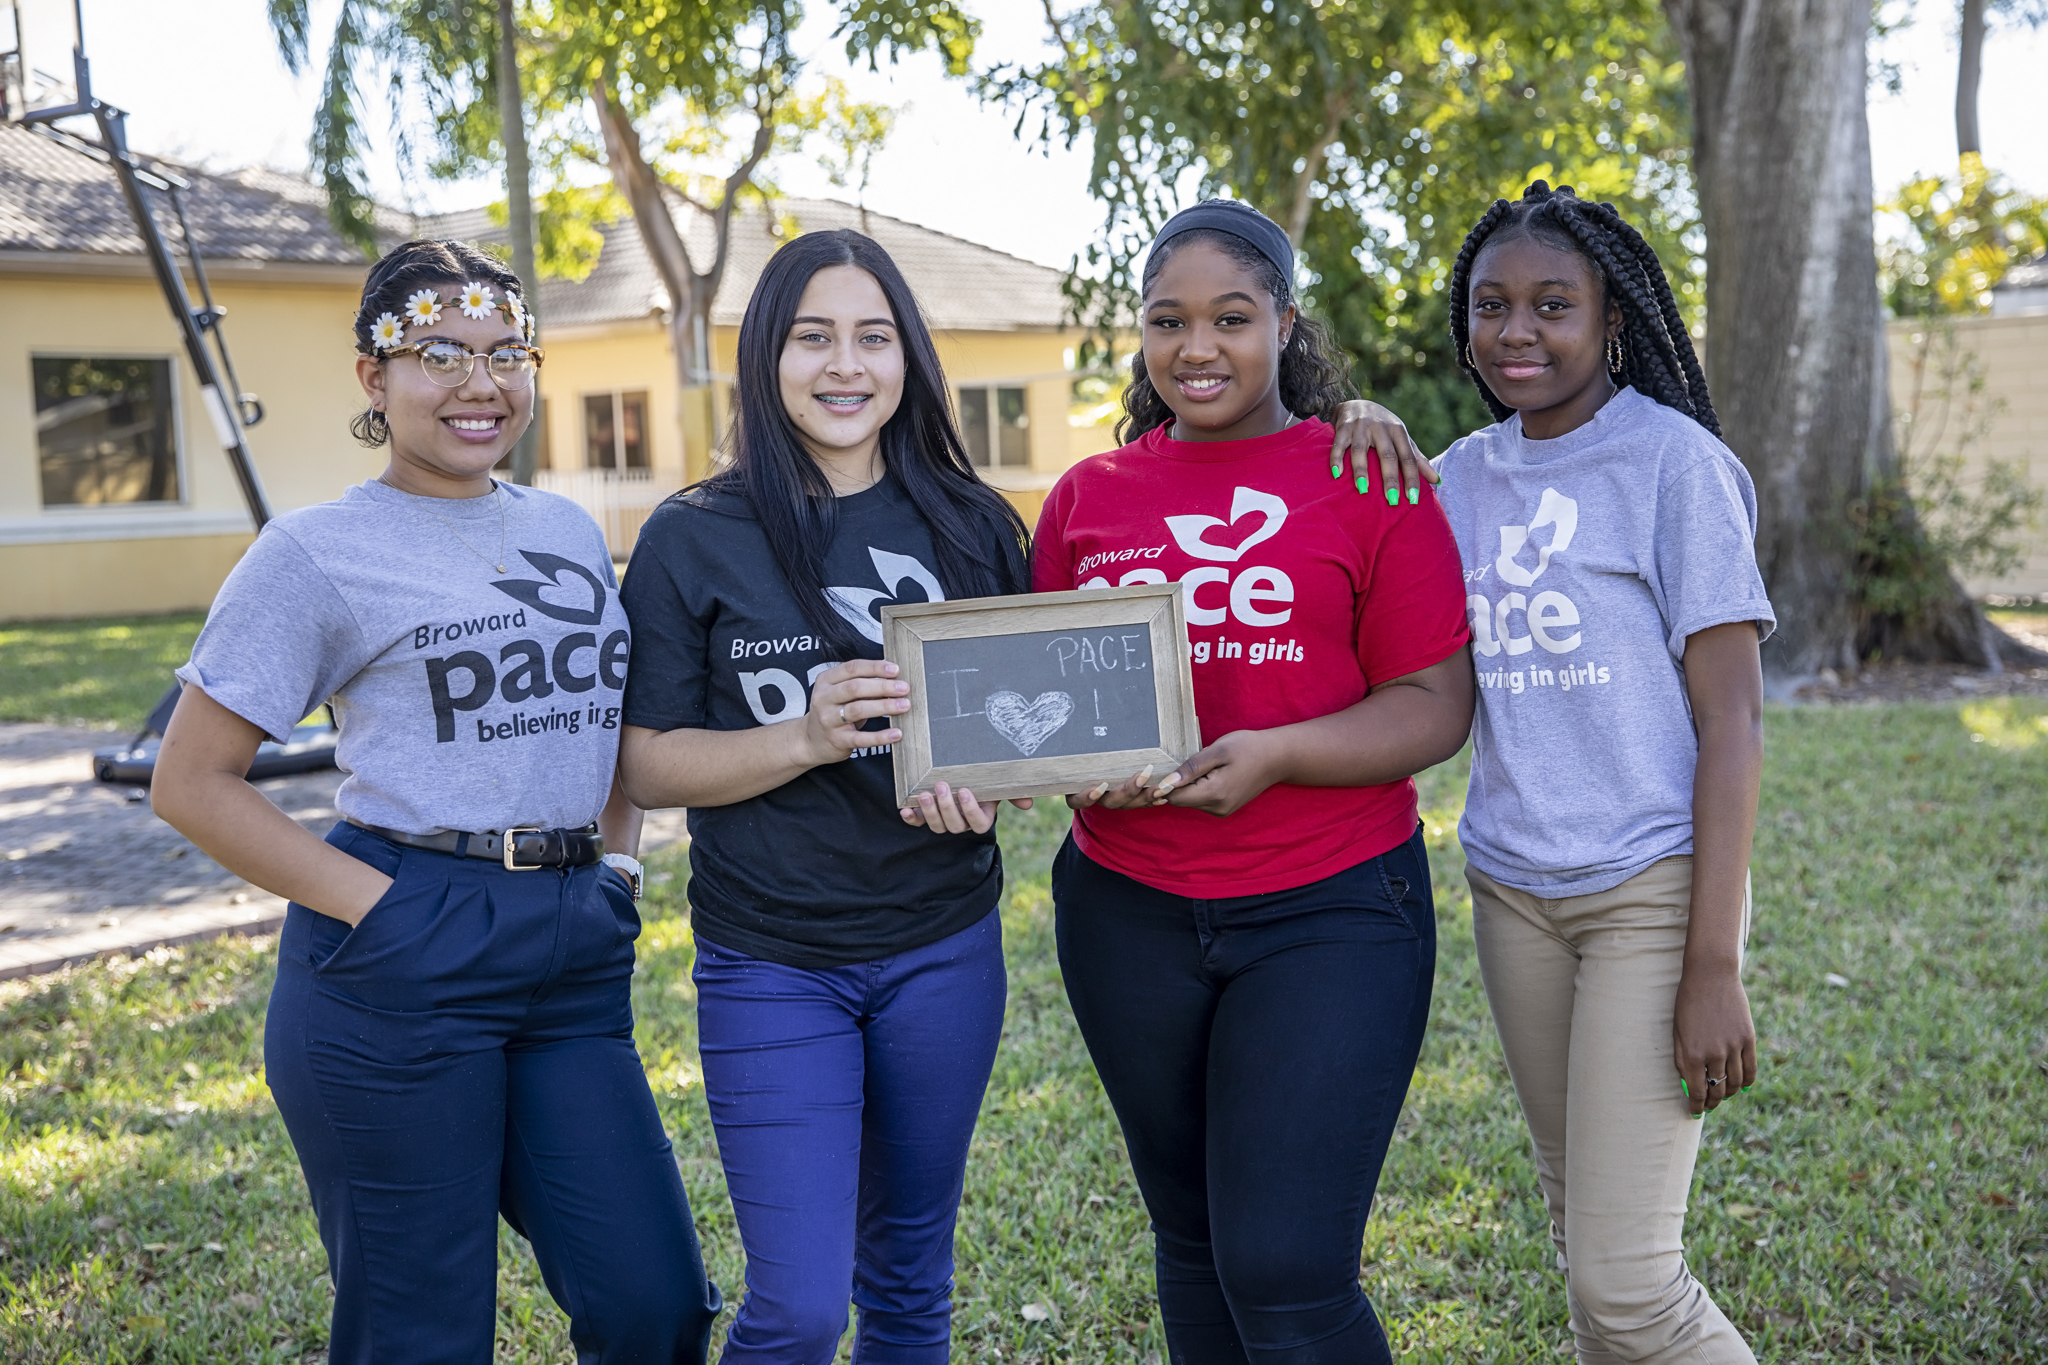 Four teen girls in pace t-shirts holding an "I love pace" sign